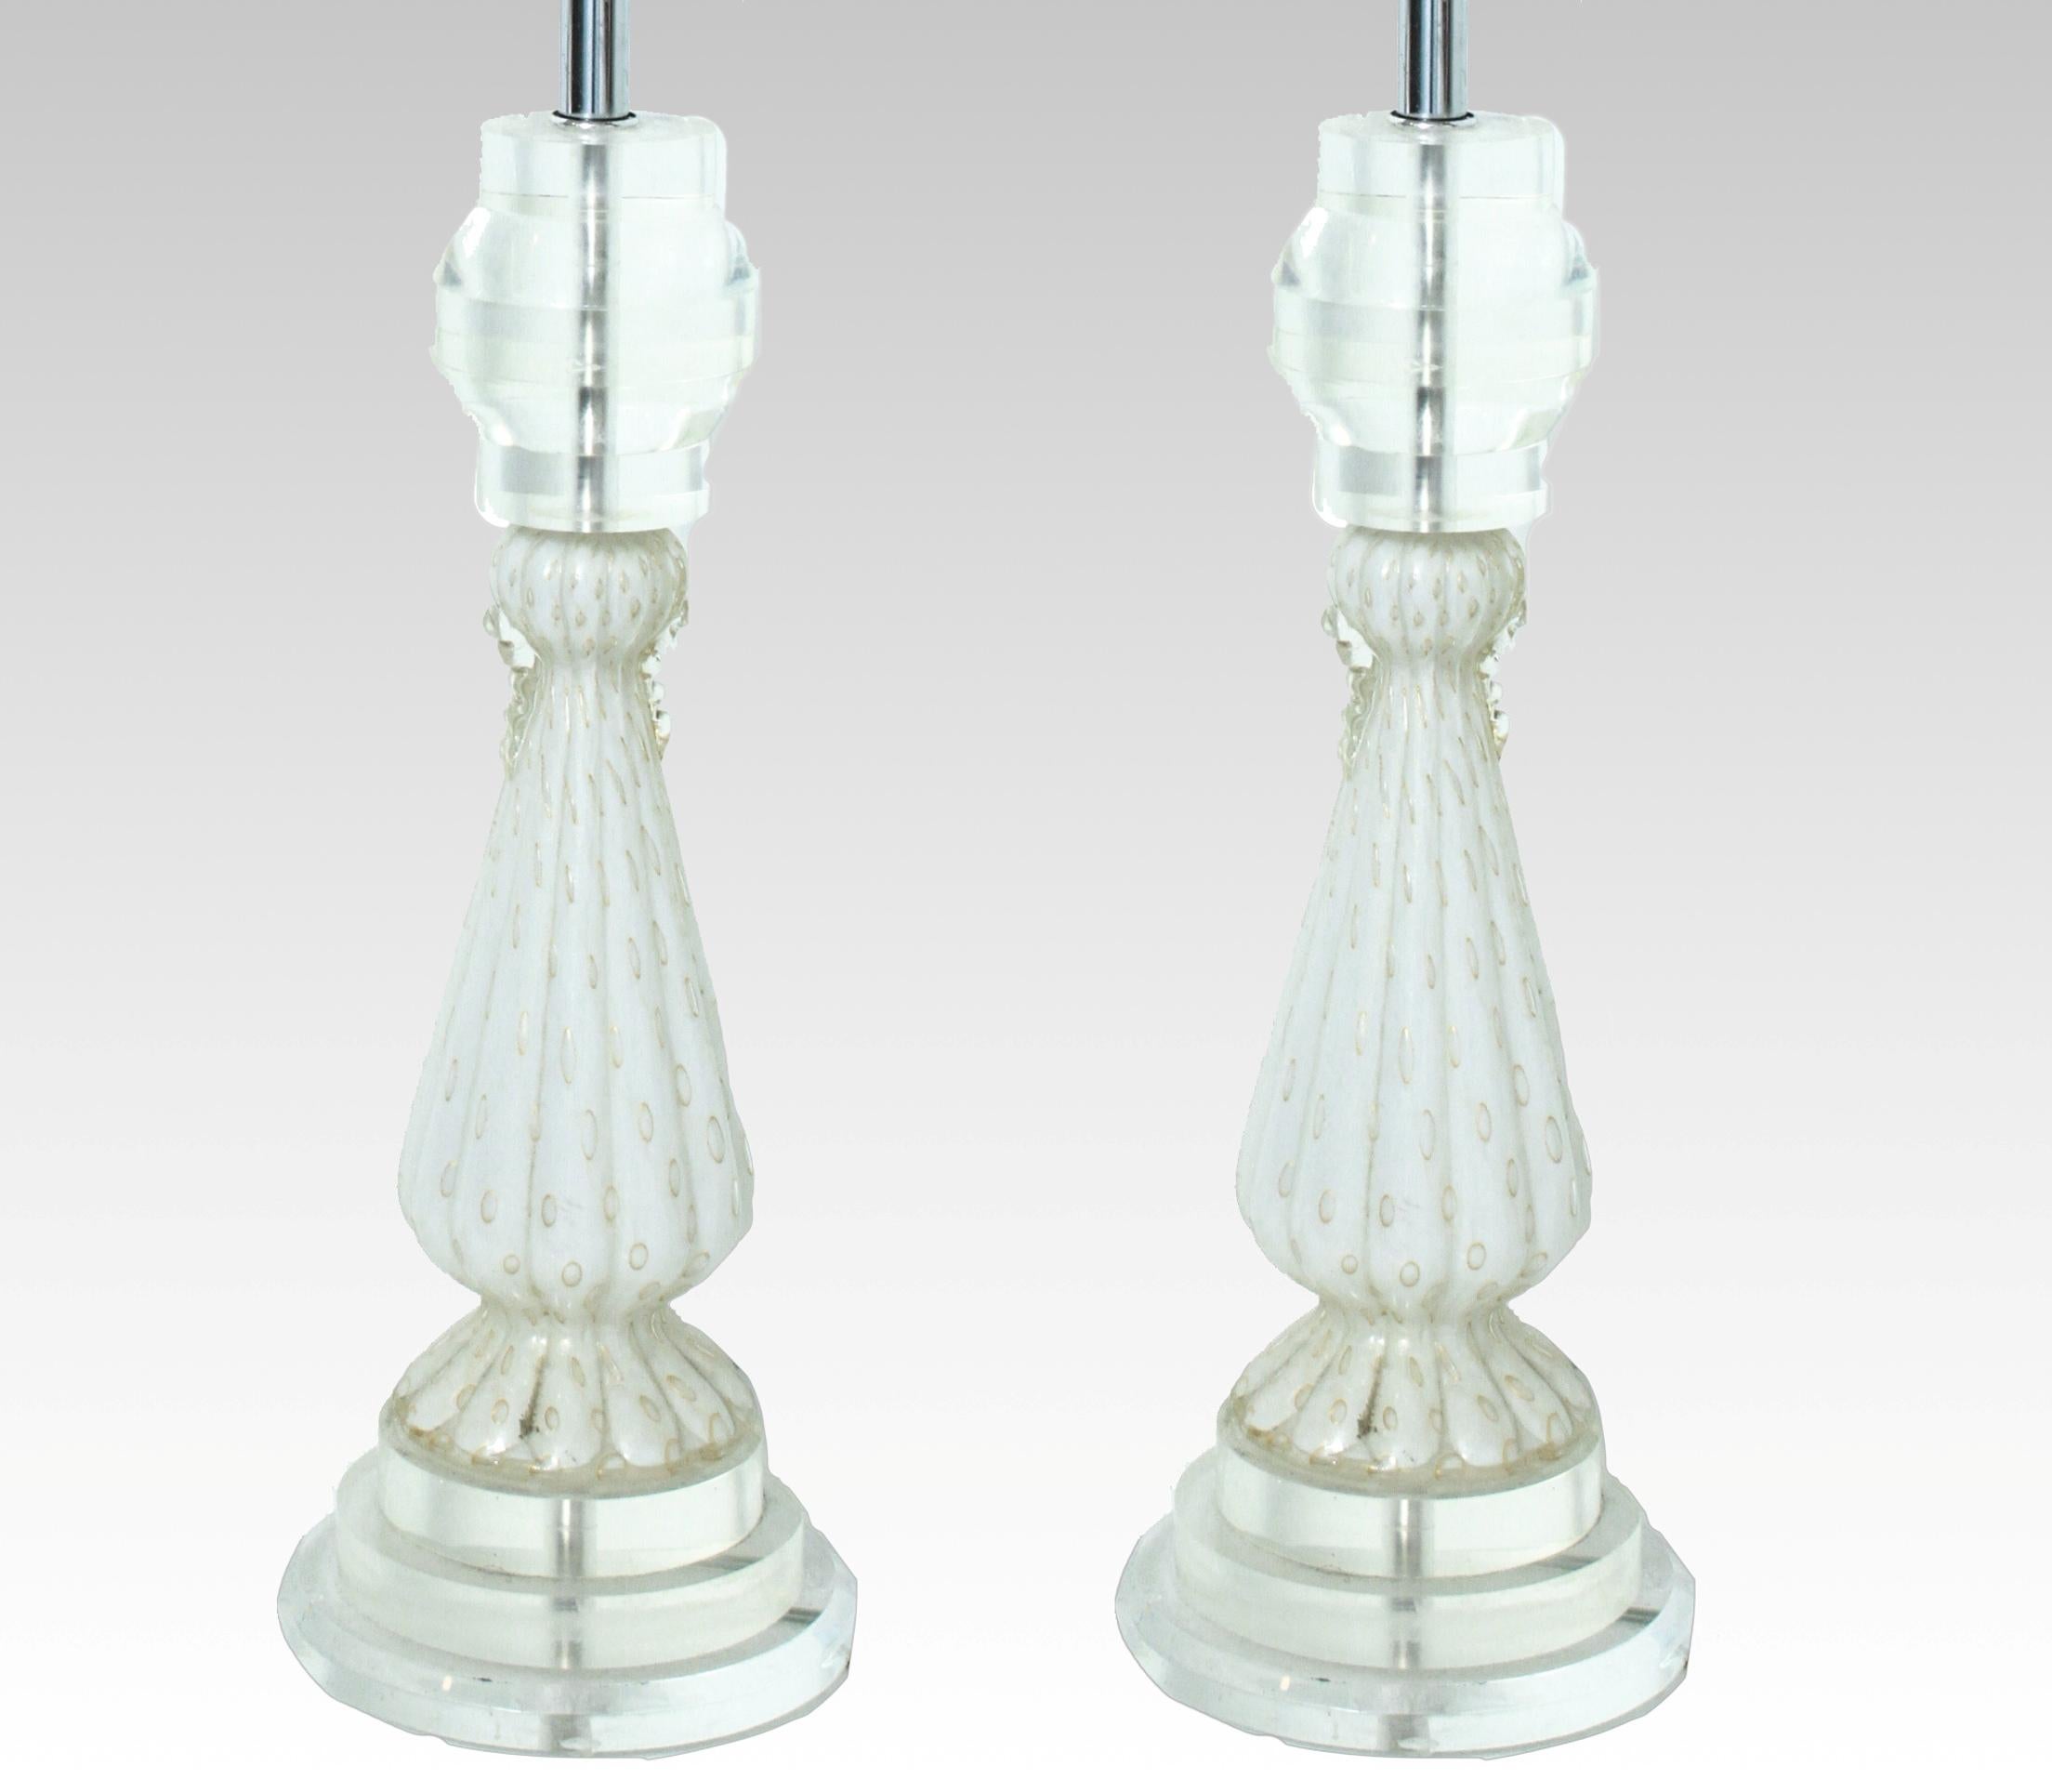 Mid-Century Modern pair of Italian Murano white and aventurine art glass table lamps with Lucite bases and tops. The pair comes with Lucite finials. In great vintage condition with age-appropriate wear and use.